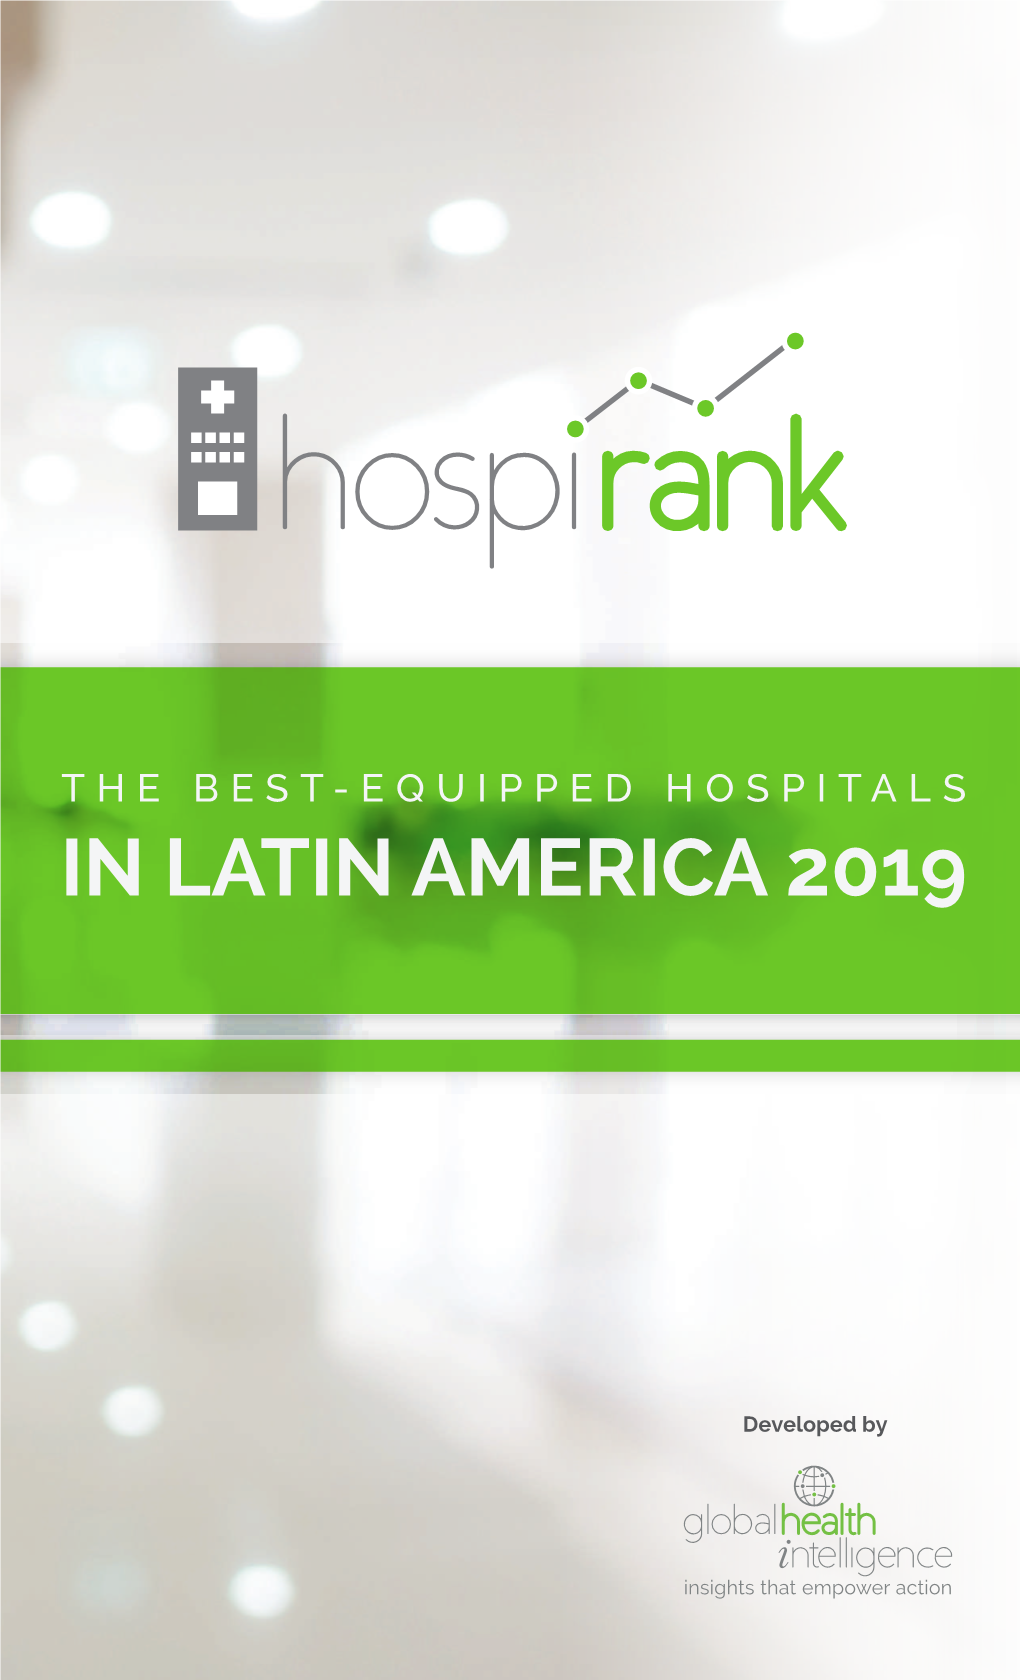 The Best-Equipped Hospitals in Latin America 2019